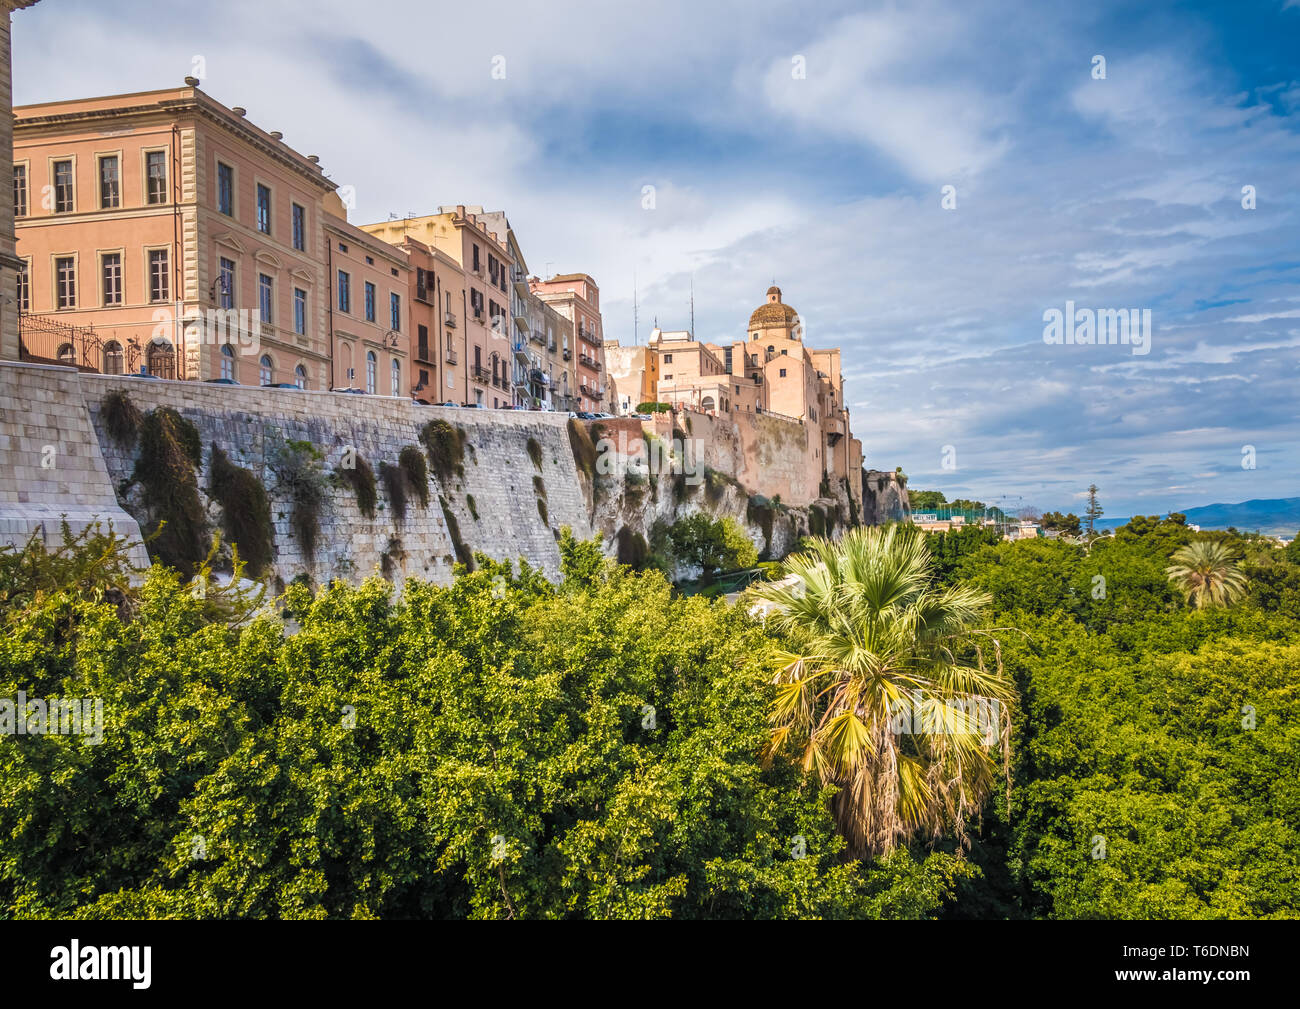 Cagliari, Sardinia, Italy. An ancient city with a long history under the rule of several civilisations. Stock Photo